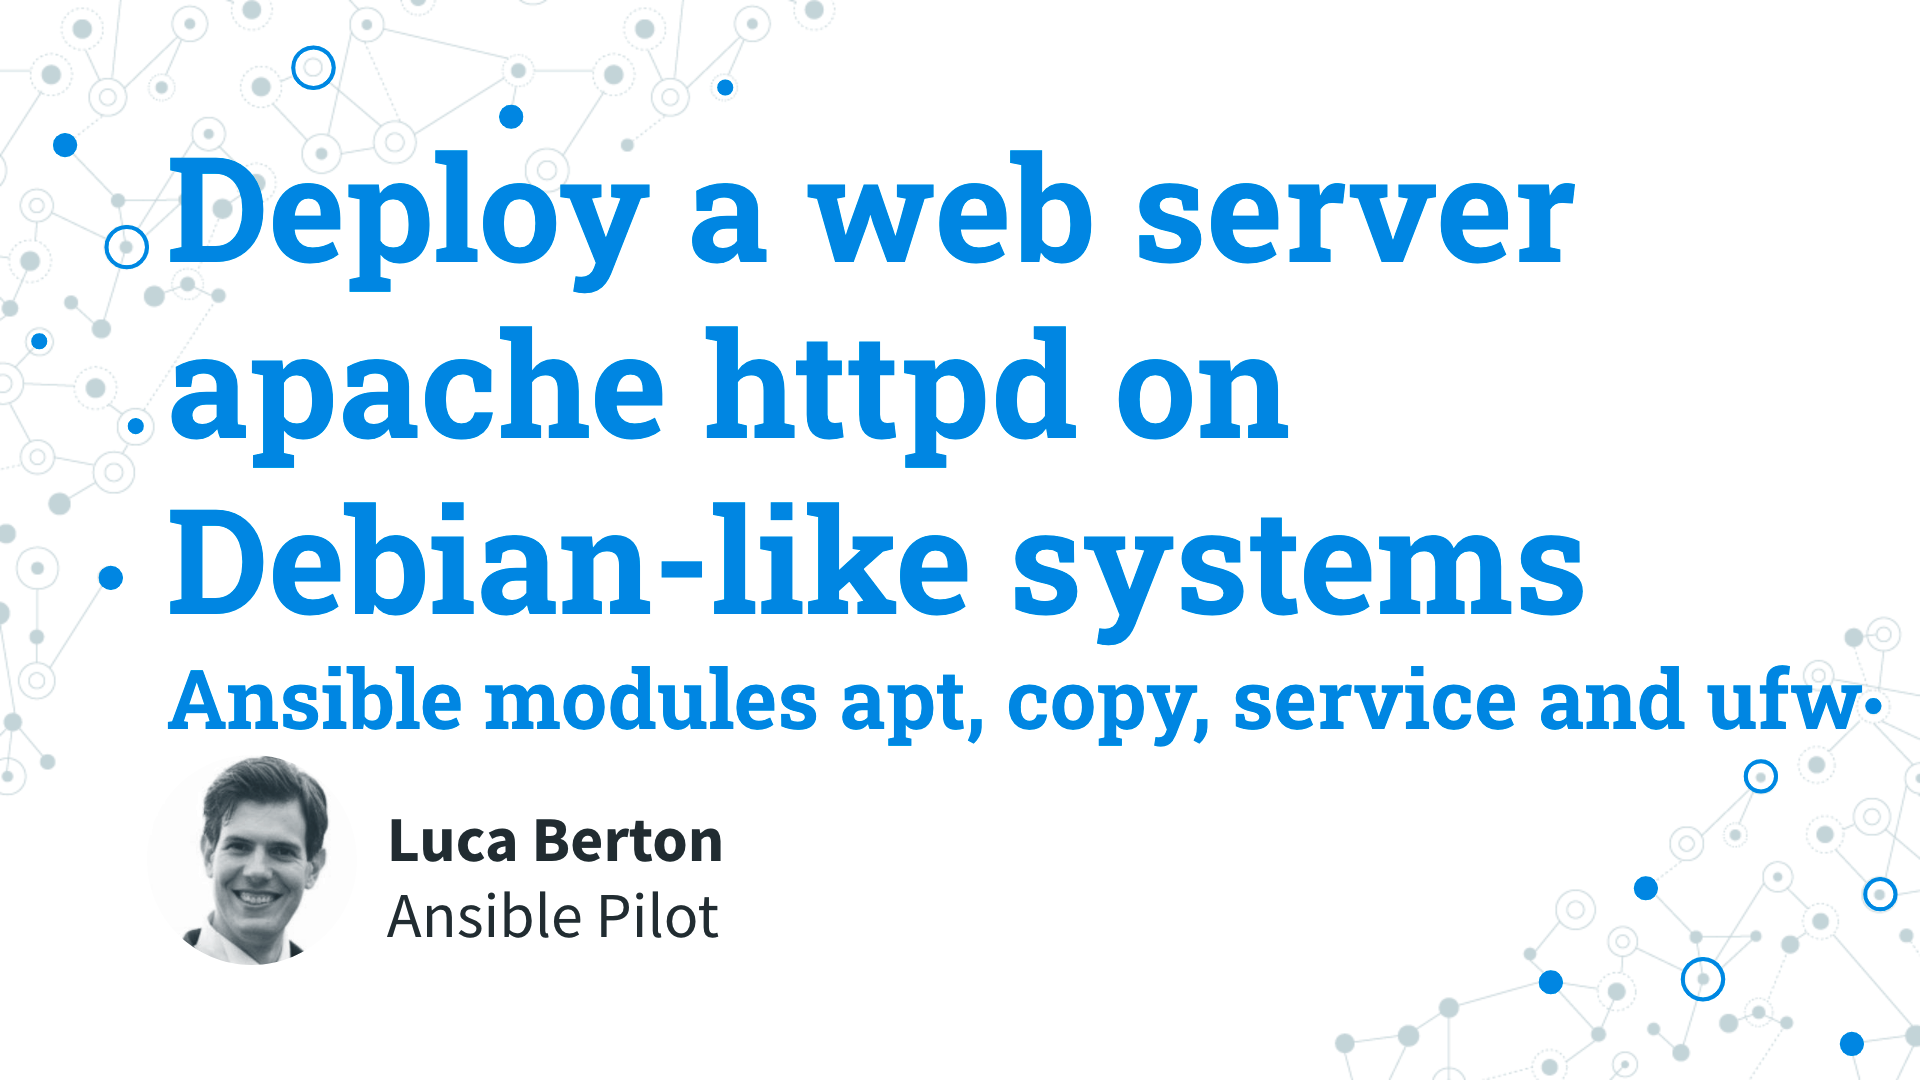 Deploy a web server apache httpd on Debian-like systems - Ansible modules apt, copy, service and ufw